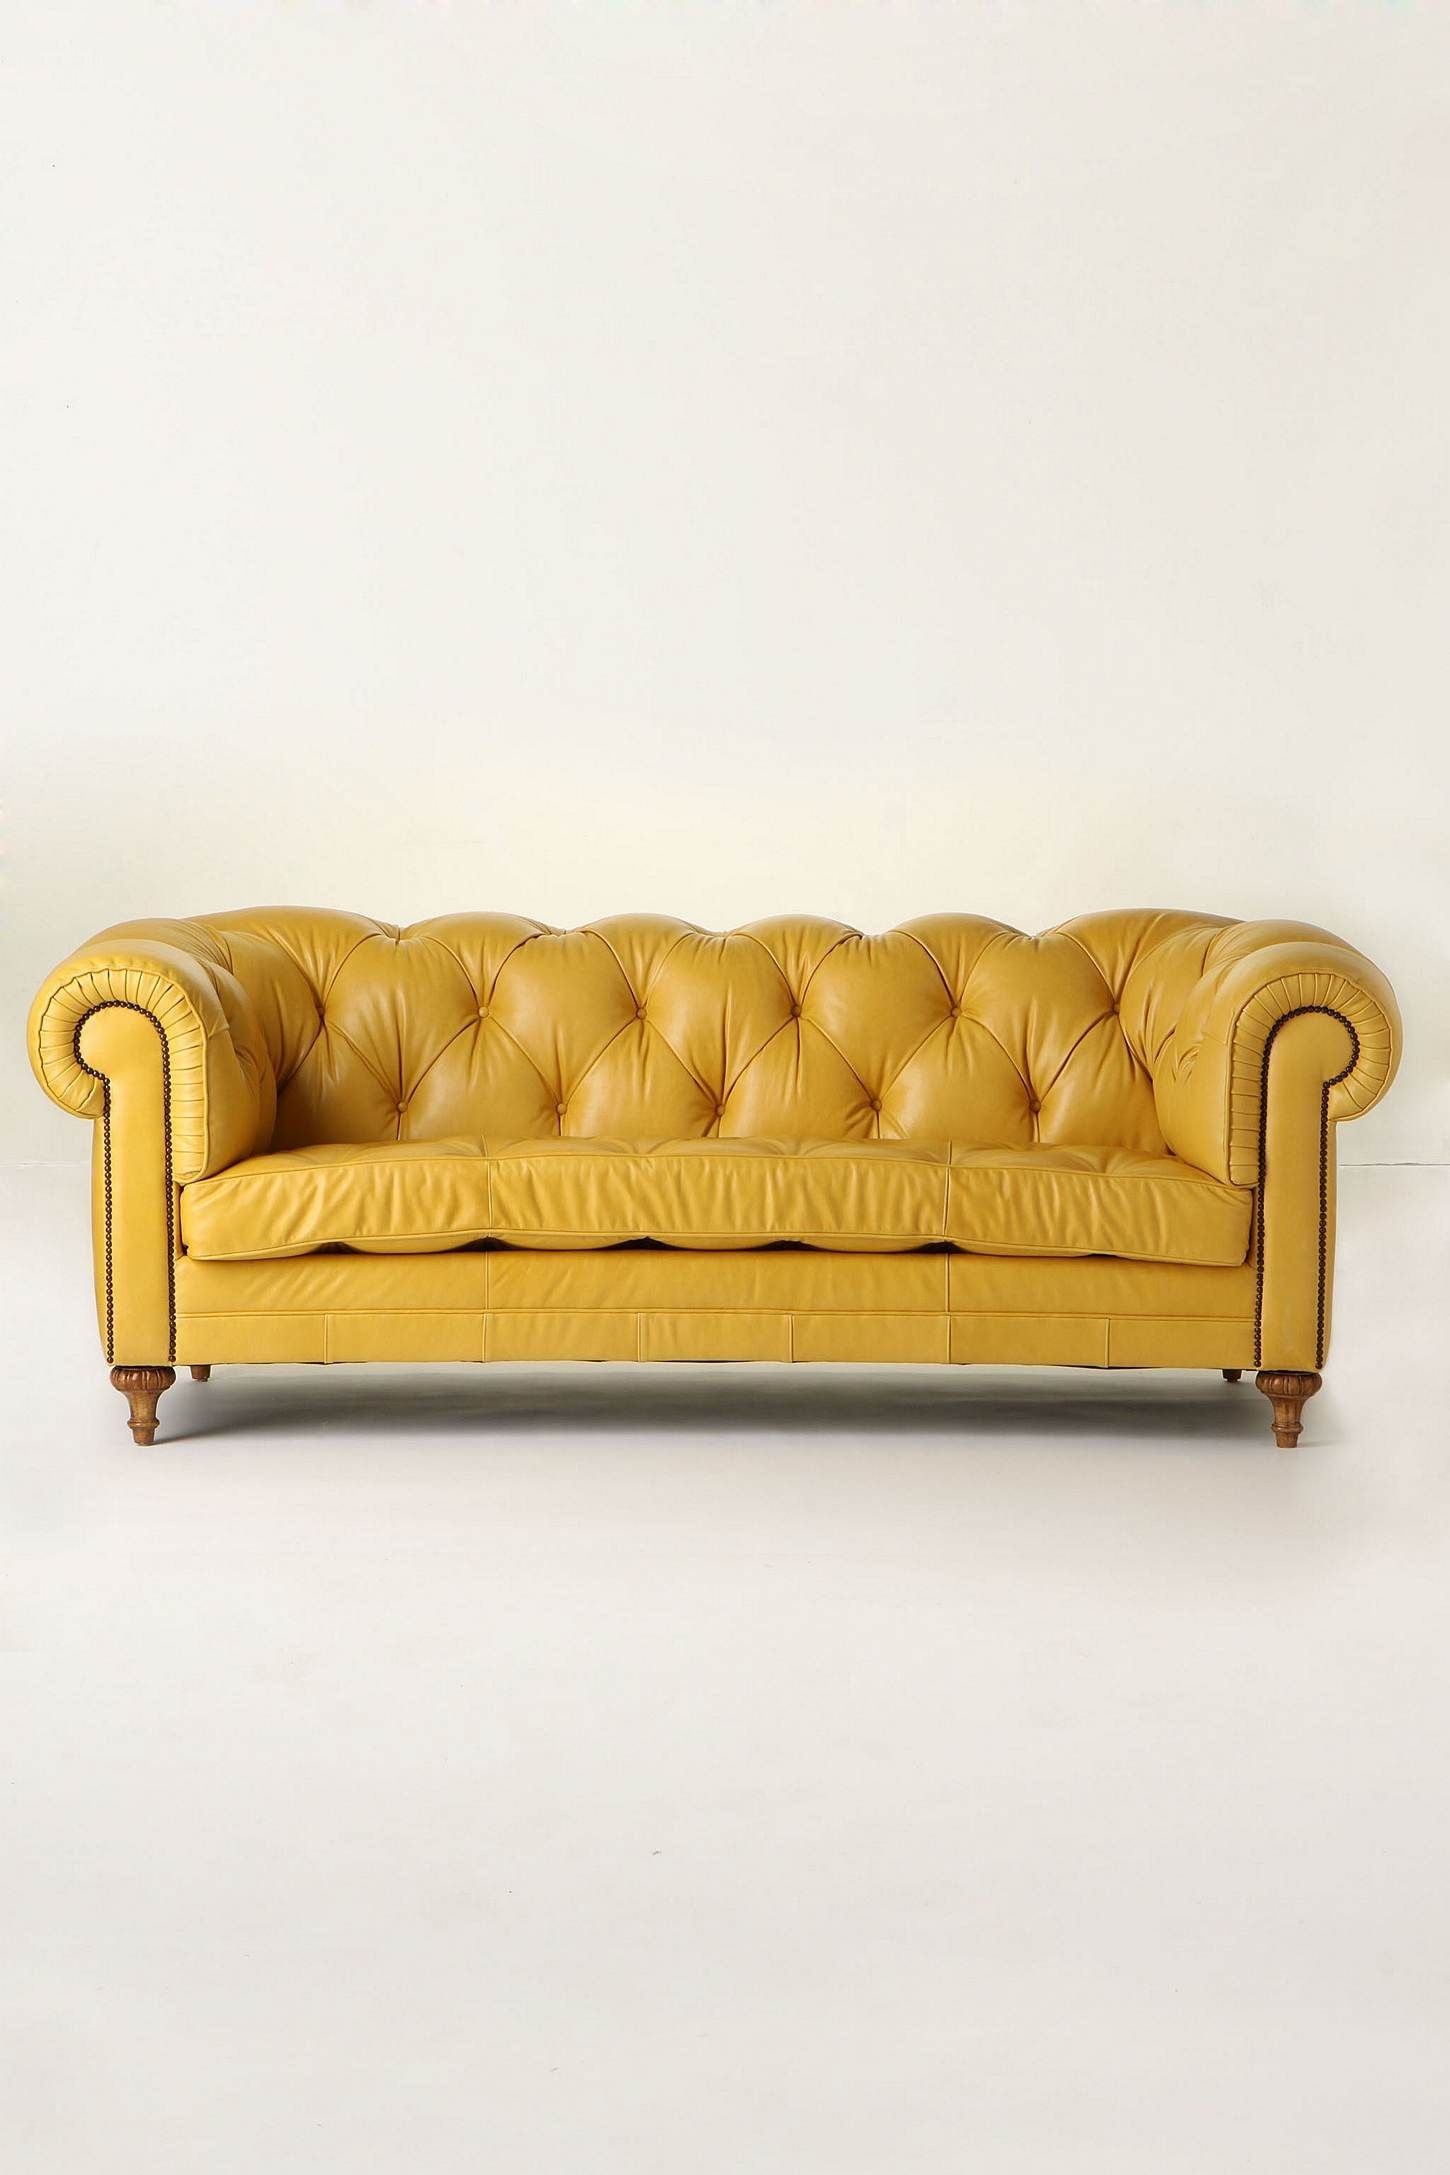 Yellow Leather Sofas - Ideas on Foter